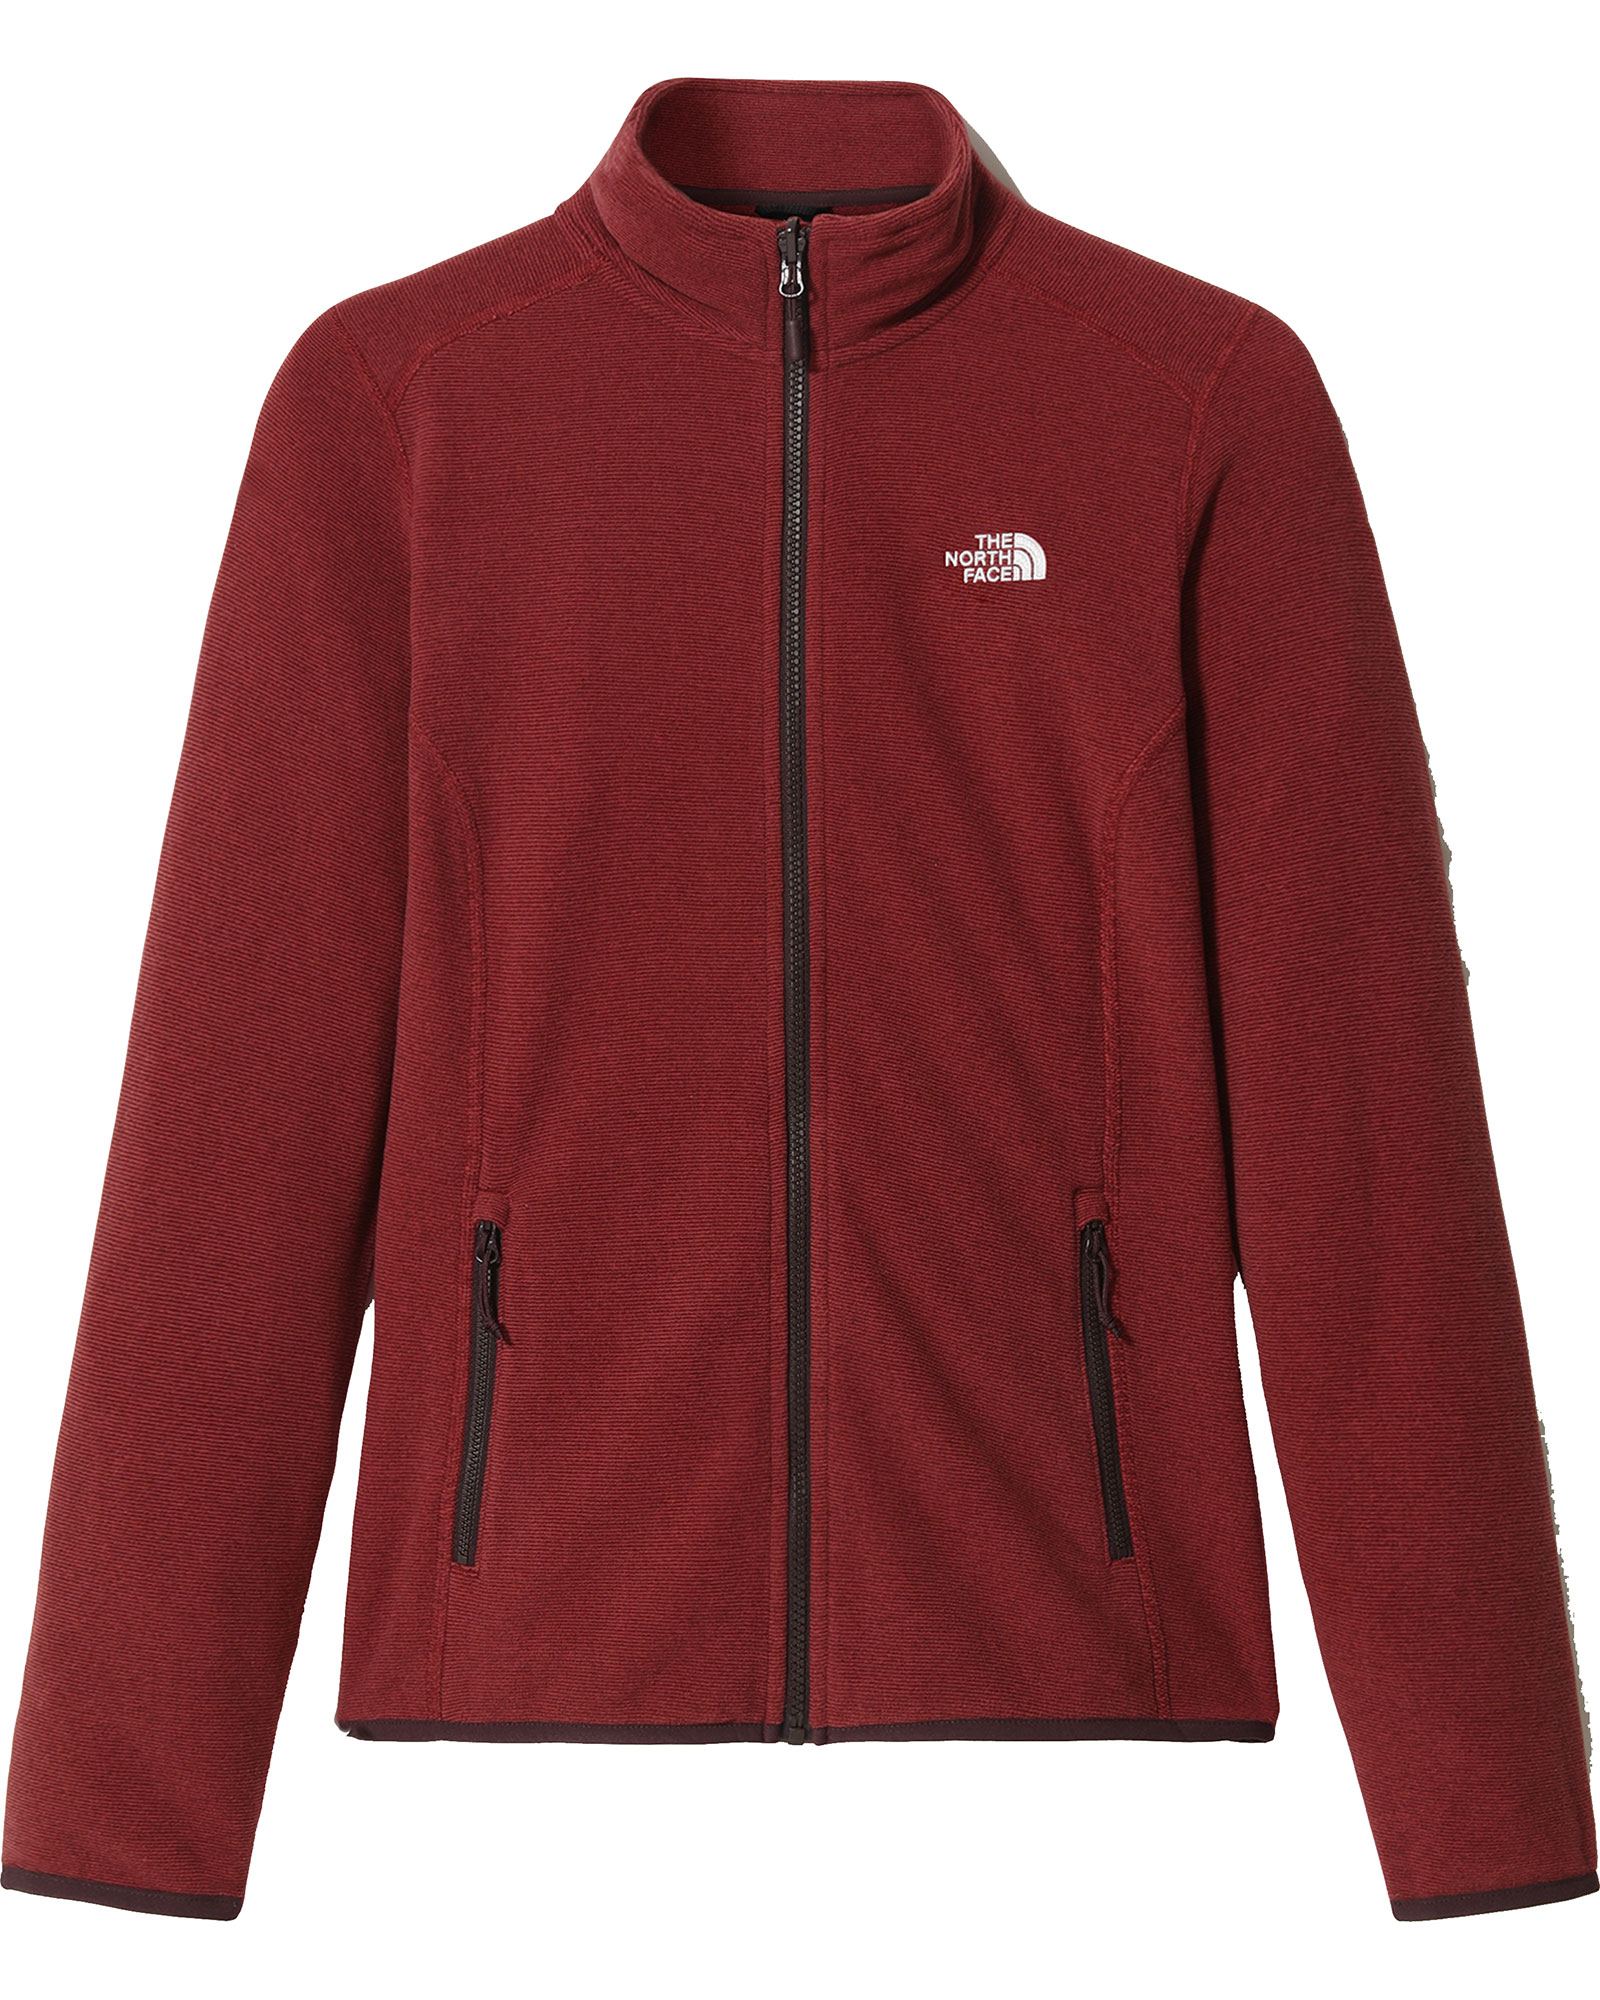 The North Face 100 Glacier Women’s Full Zip Jacket - Root Brown Stripe XS